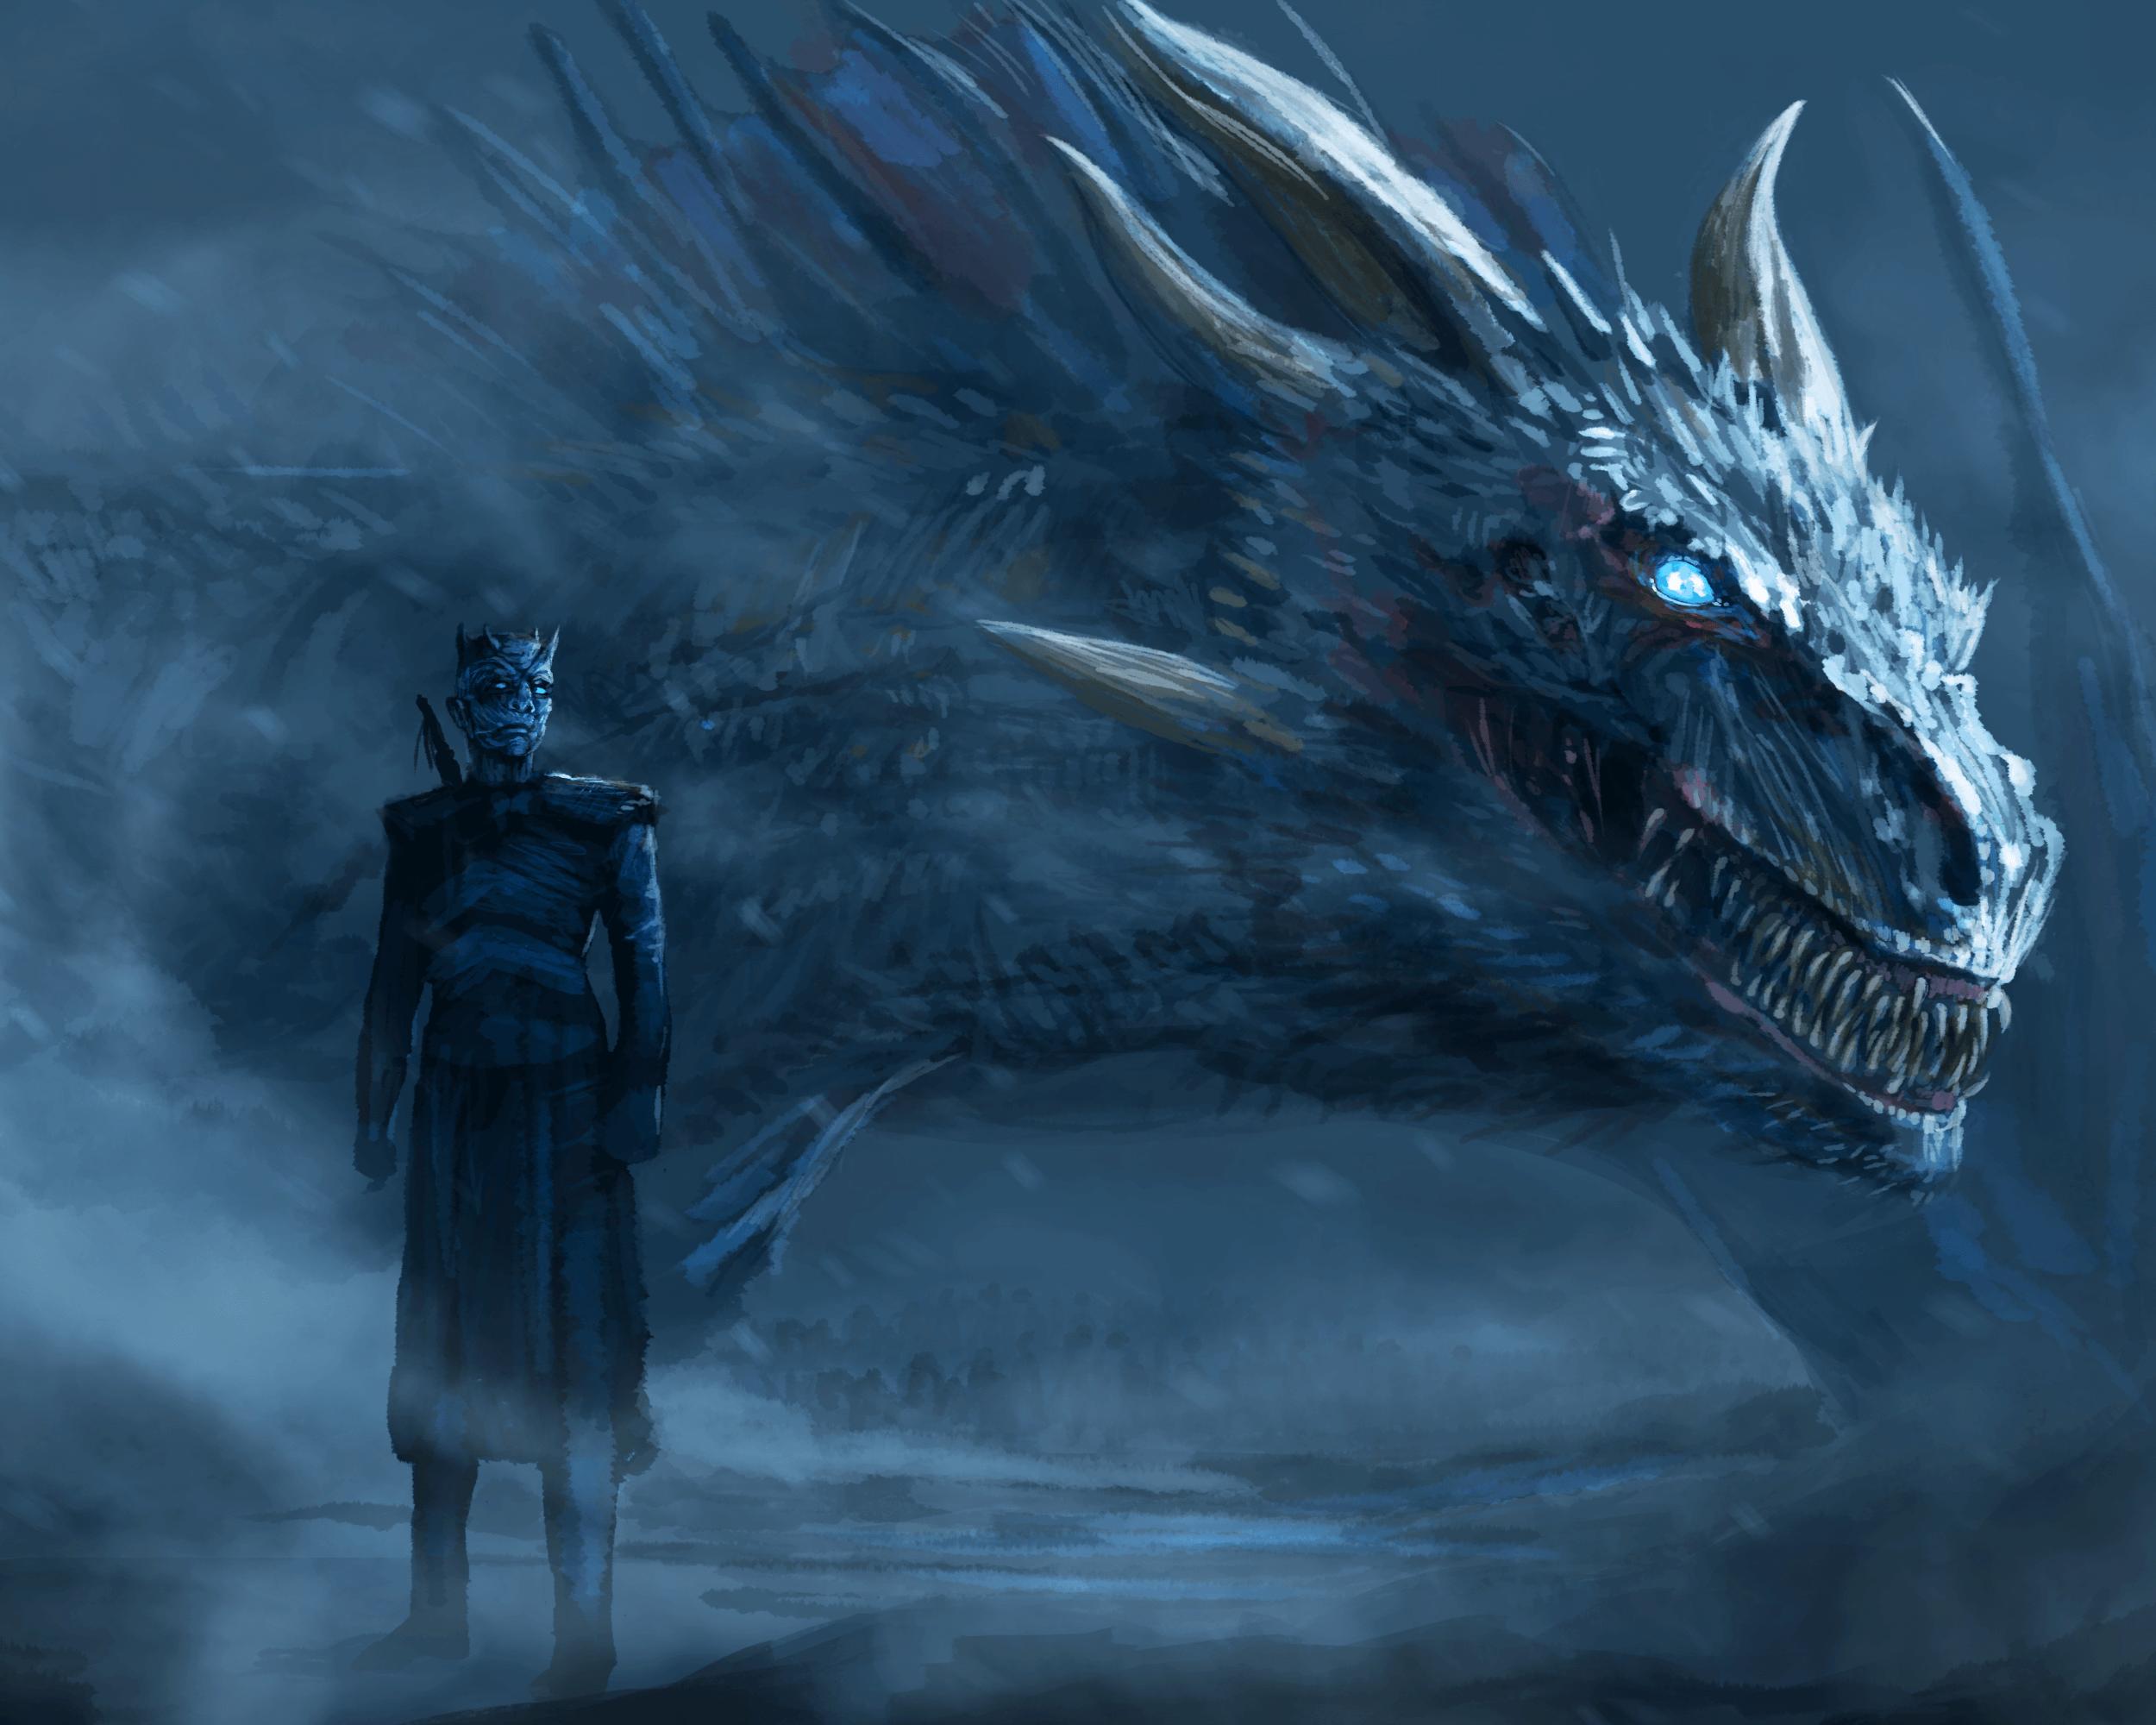 Best Game of thrones (GOT) wallpaper and image 2019